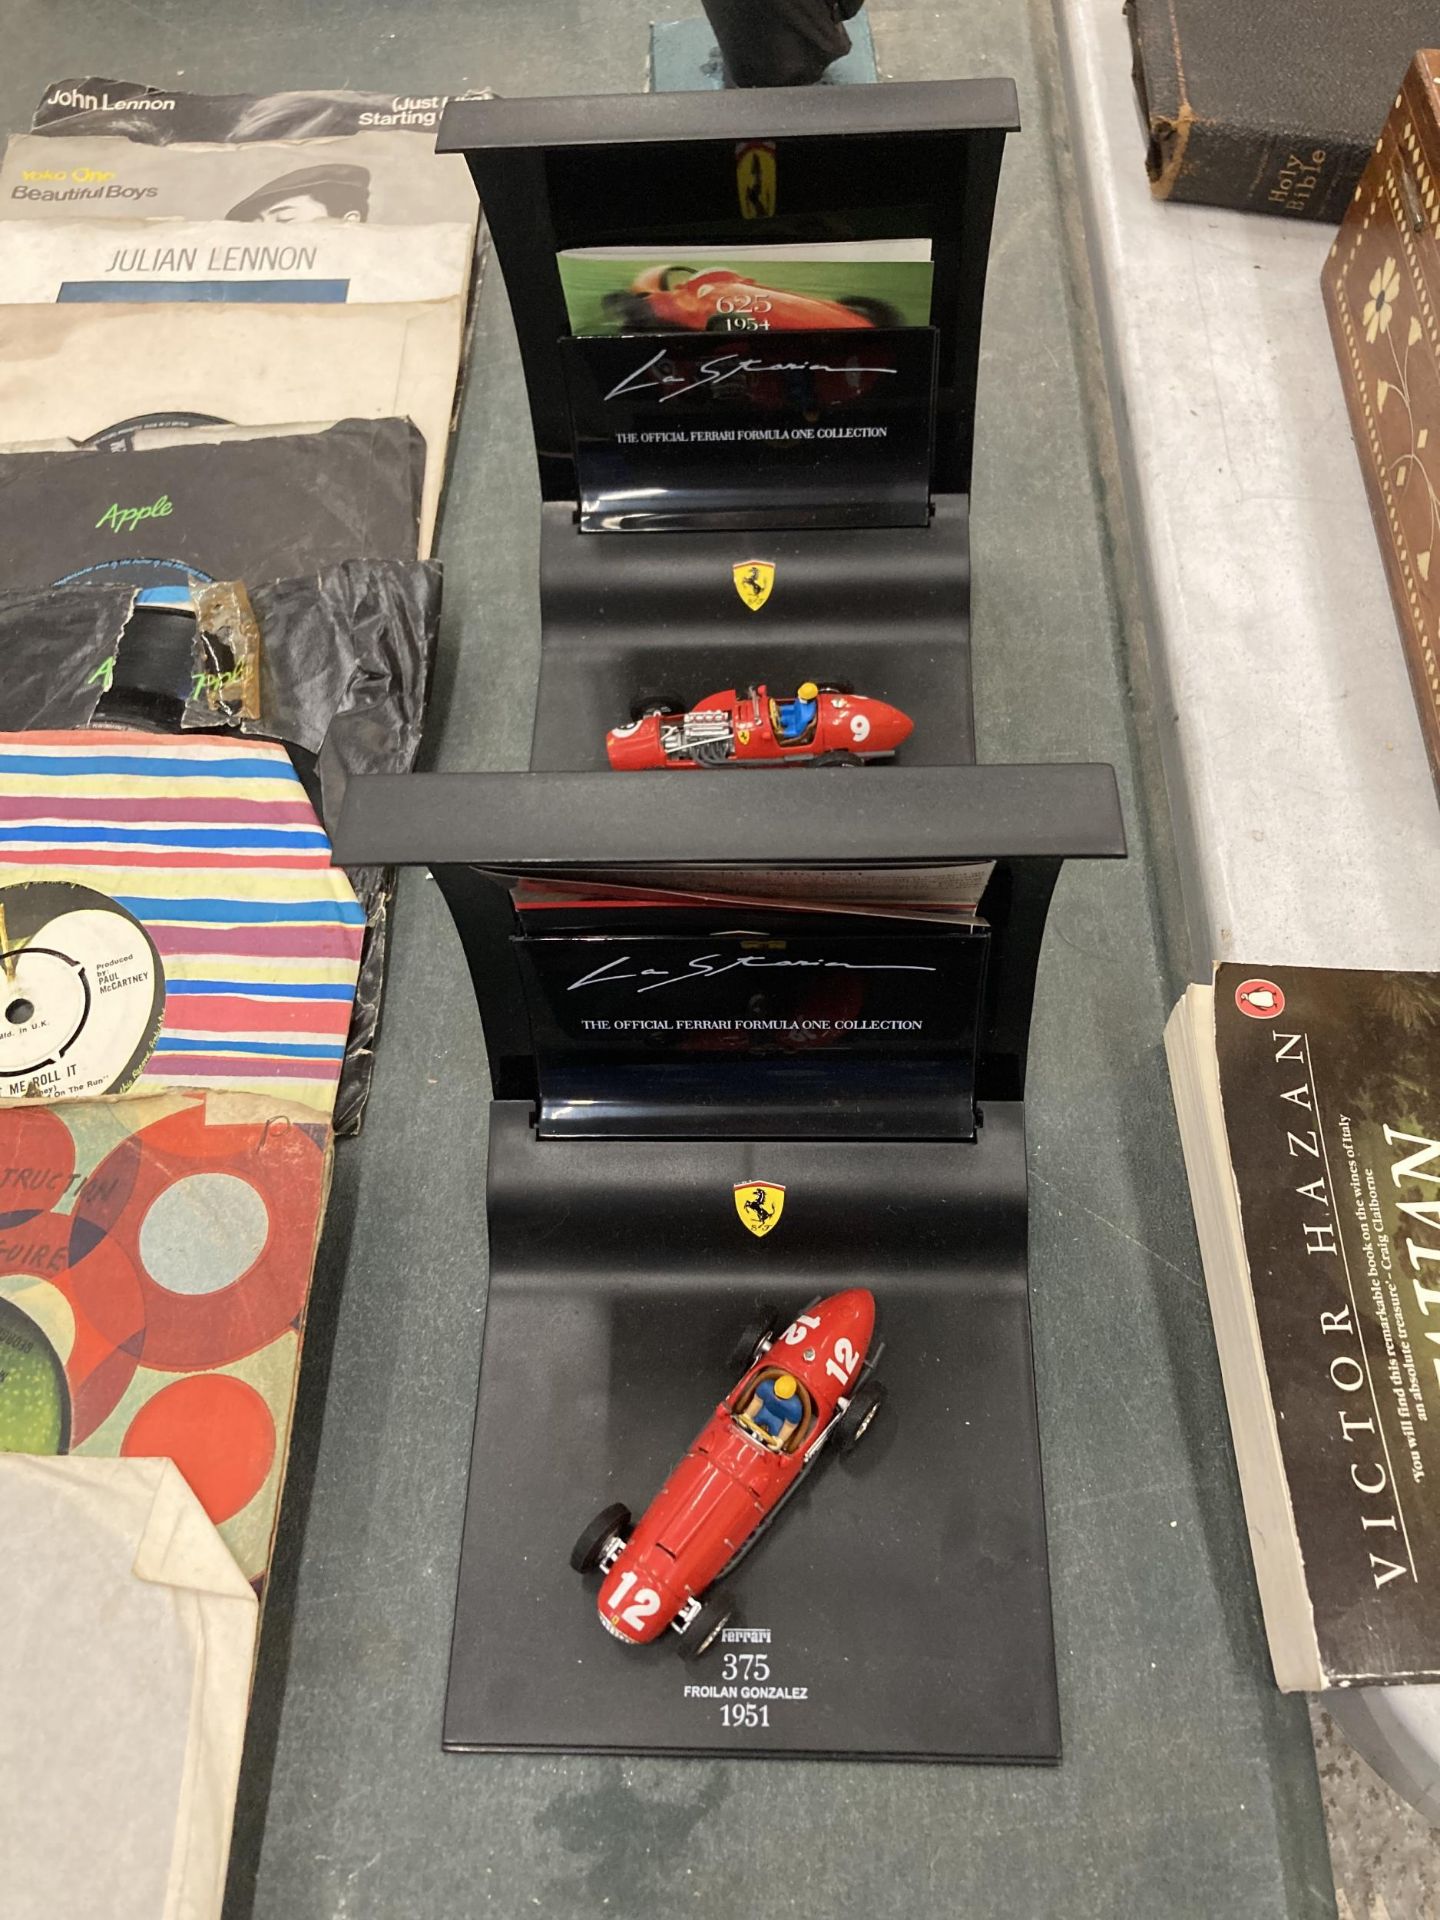 TWO MODELS FROM THE OFFICIAL FERRARI COLLECTION, 1951 AND 1954